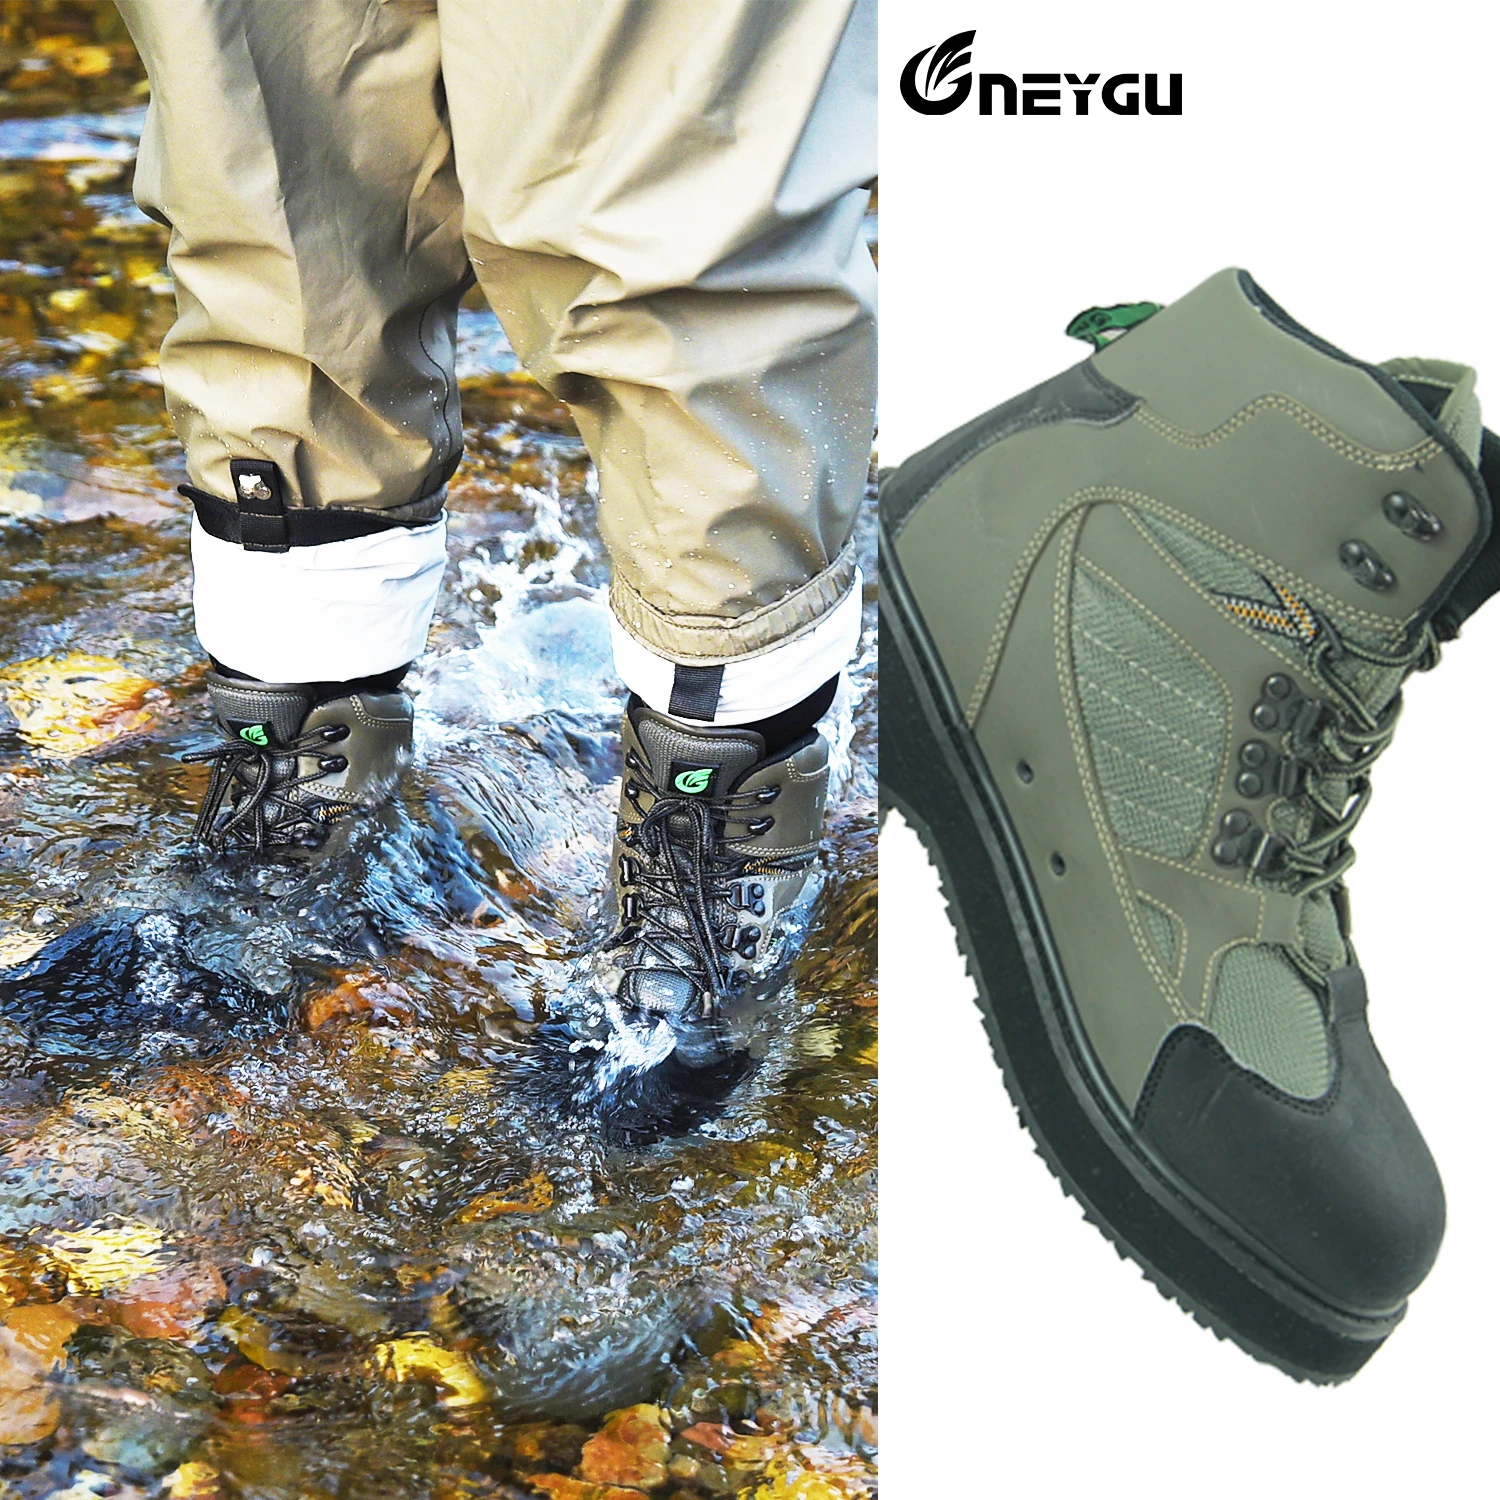 https://ae01.alicdn.com/kf/H96179174ae364bb69cf0a67de4bdad88i/NEYGU-fly-fishing-camo-wading-boots-wader-shoes-for-hunting-with-felt-sole-suit-for-outdoor.jpg